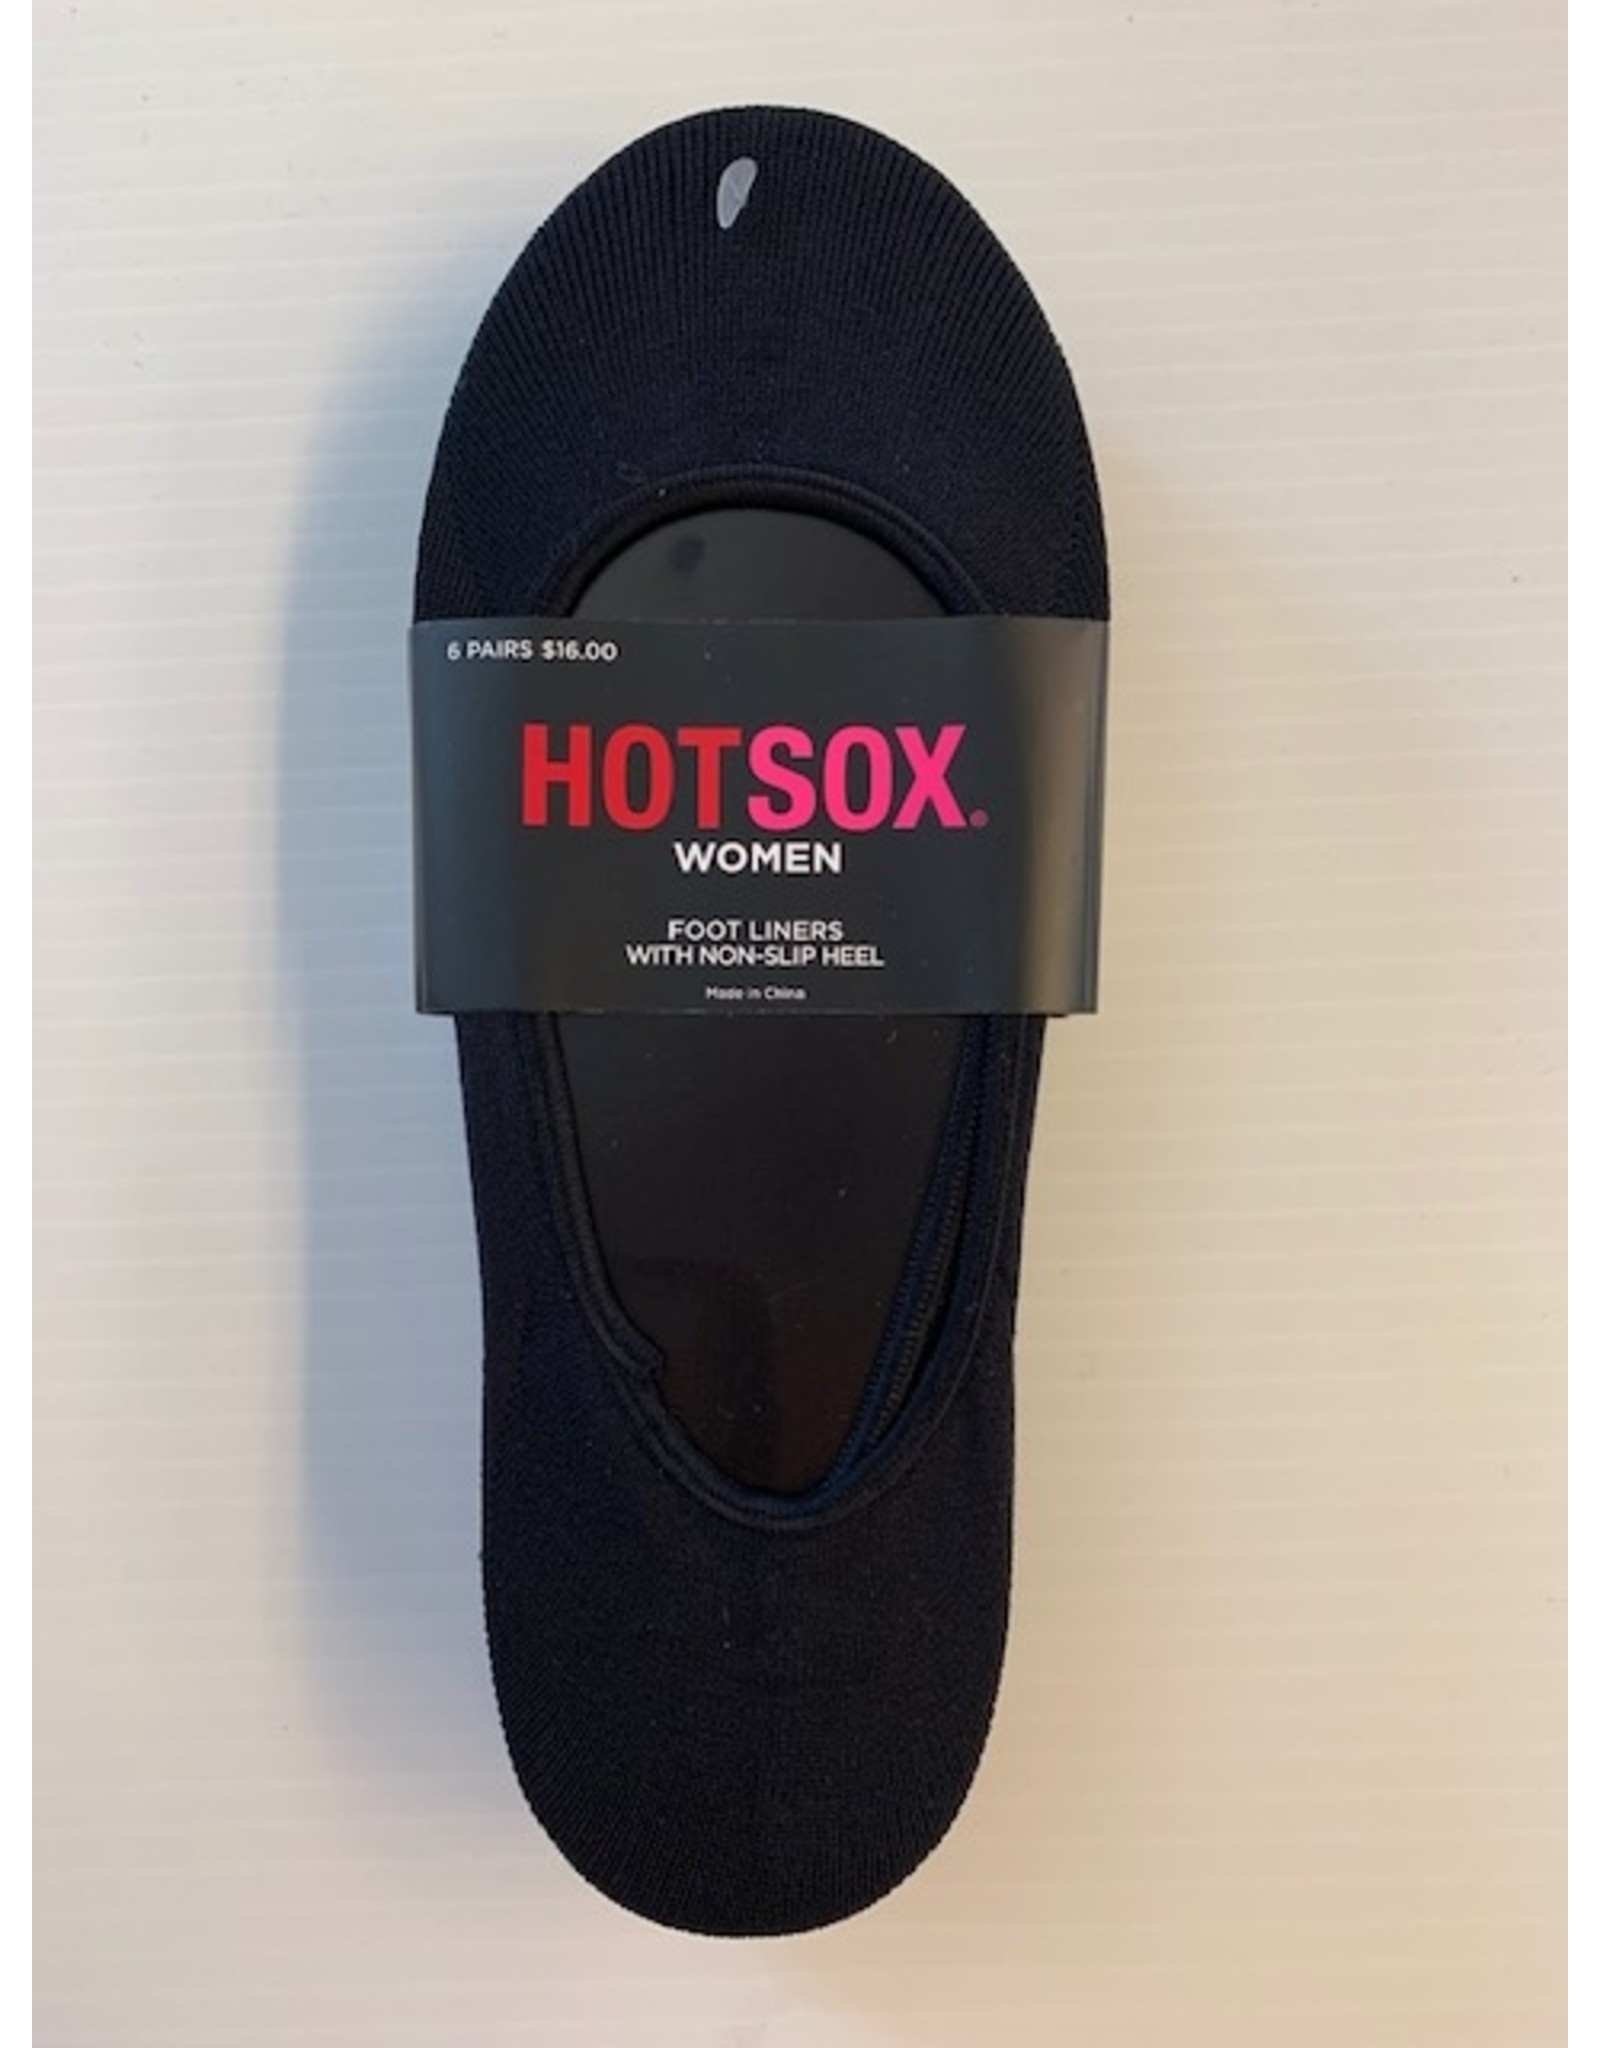 Hotsox Hot Sox Women's 6-Pack Foot Liners With Non-Slip Heel Ped HO000105PK